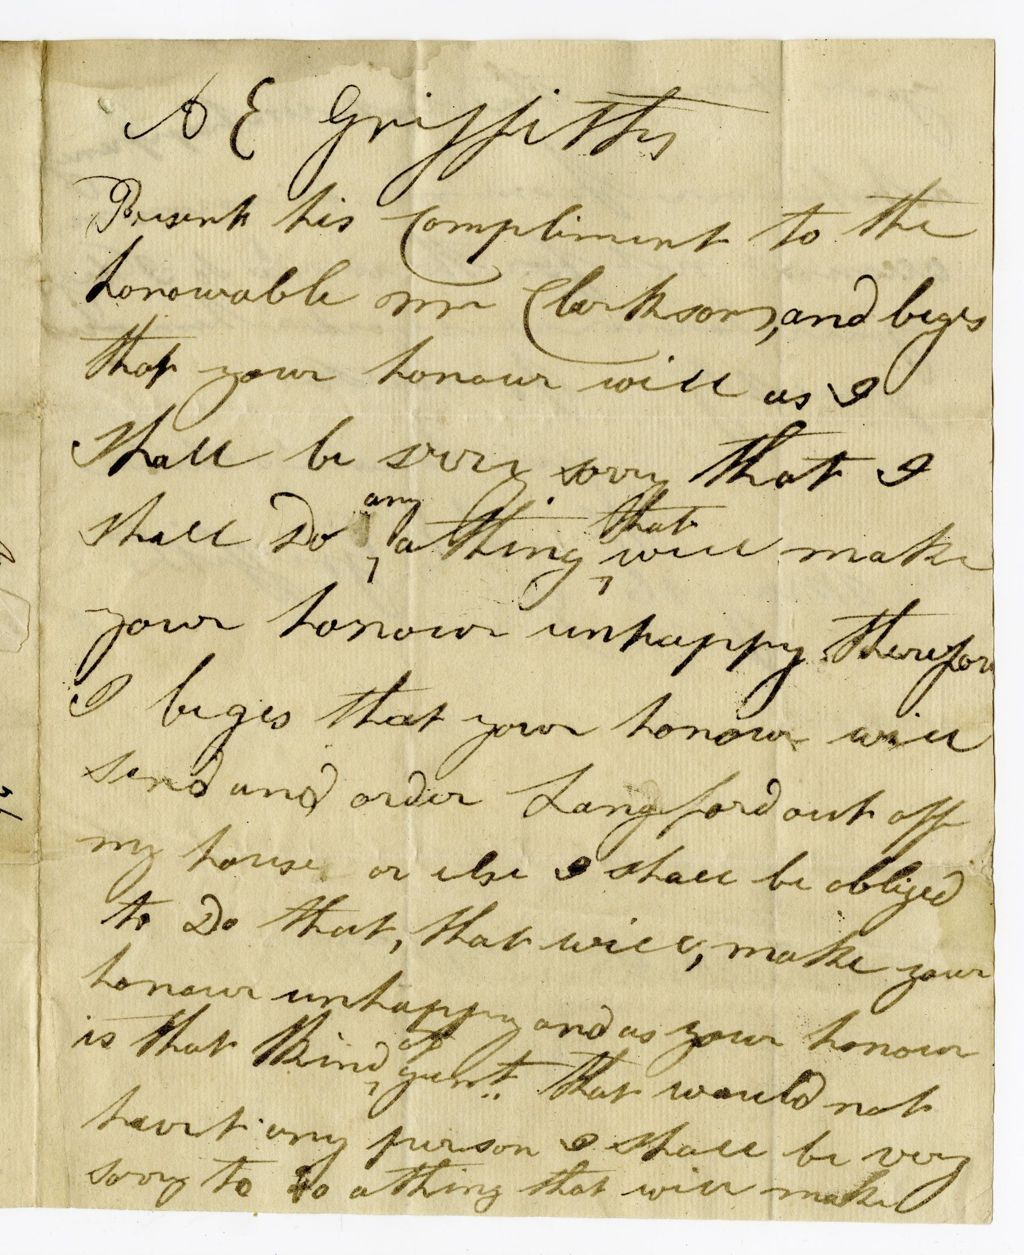 Miniature of Letter from A. E. Griffiths to John Clarkson